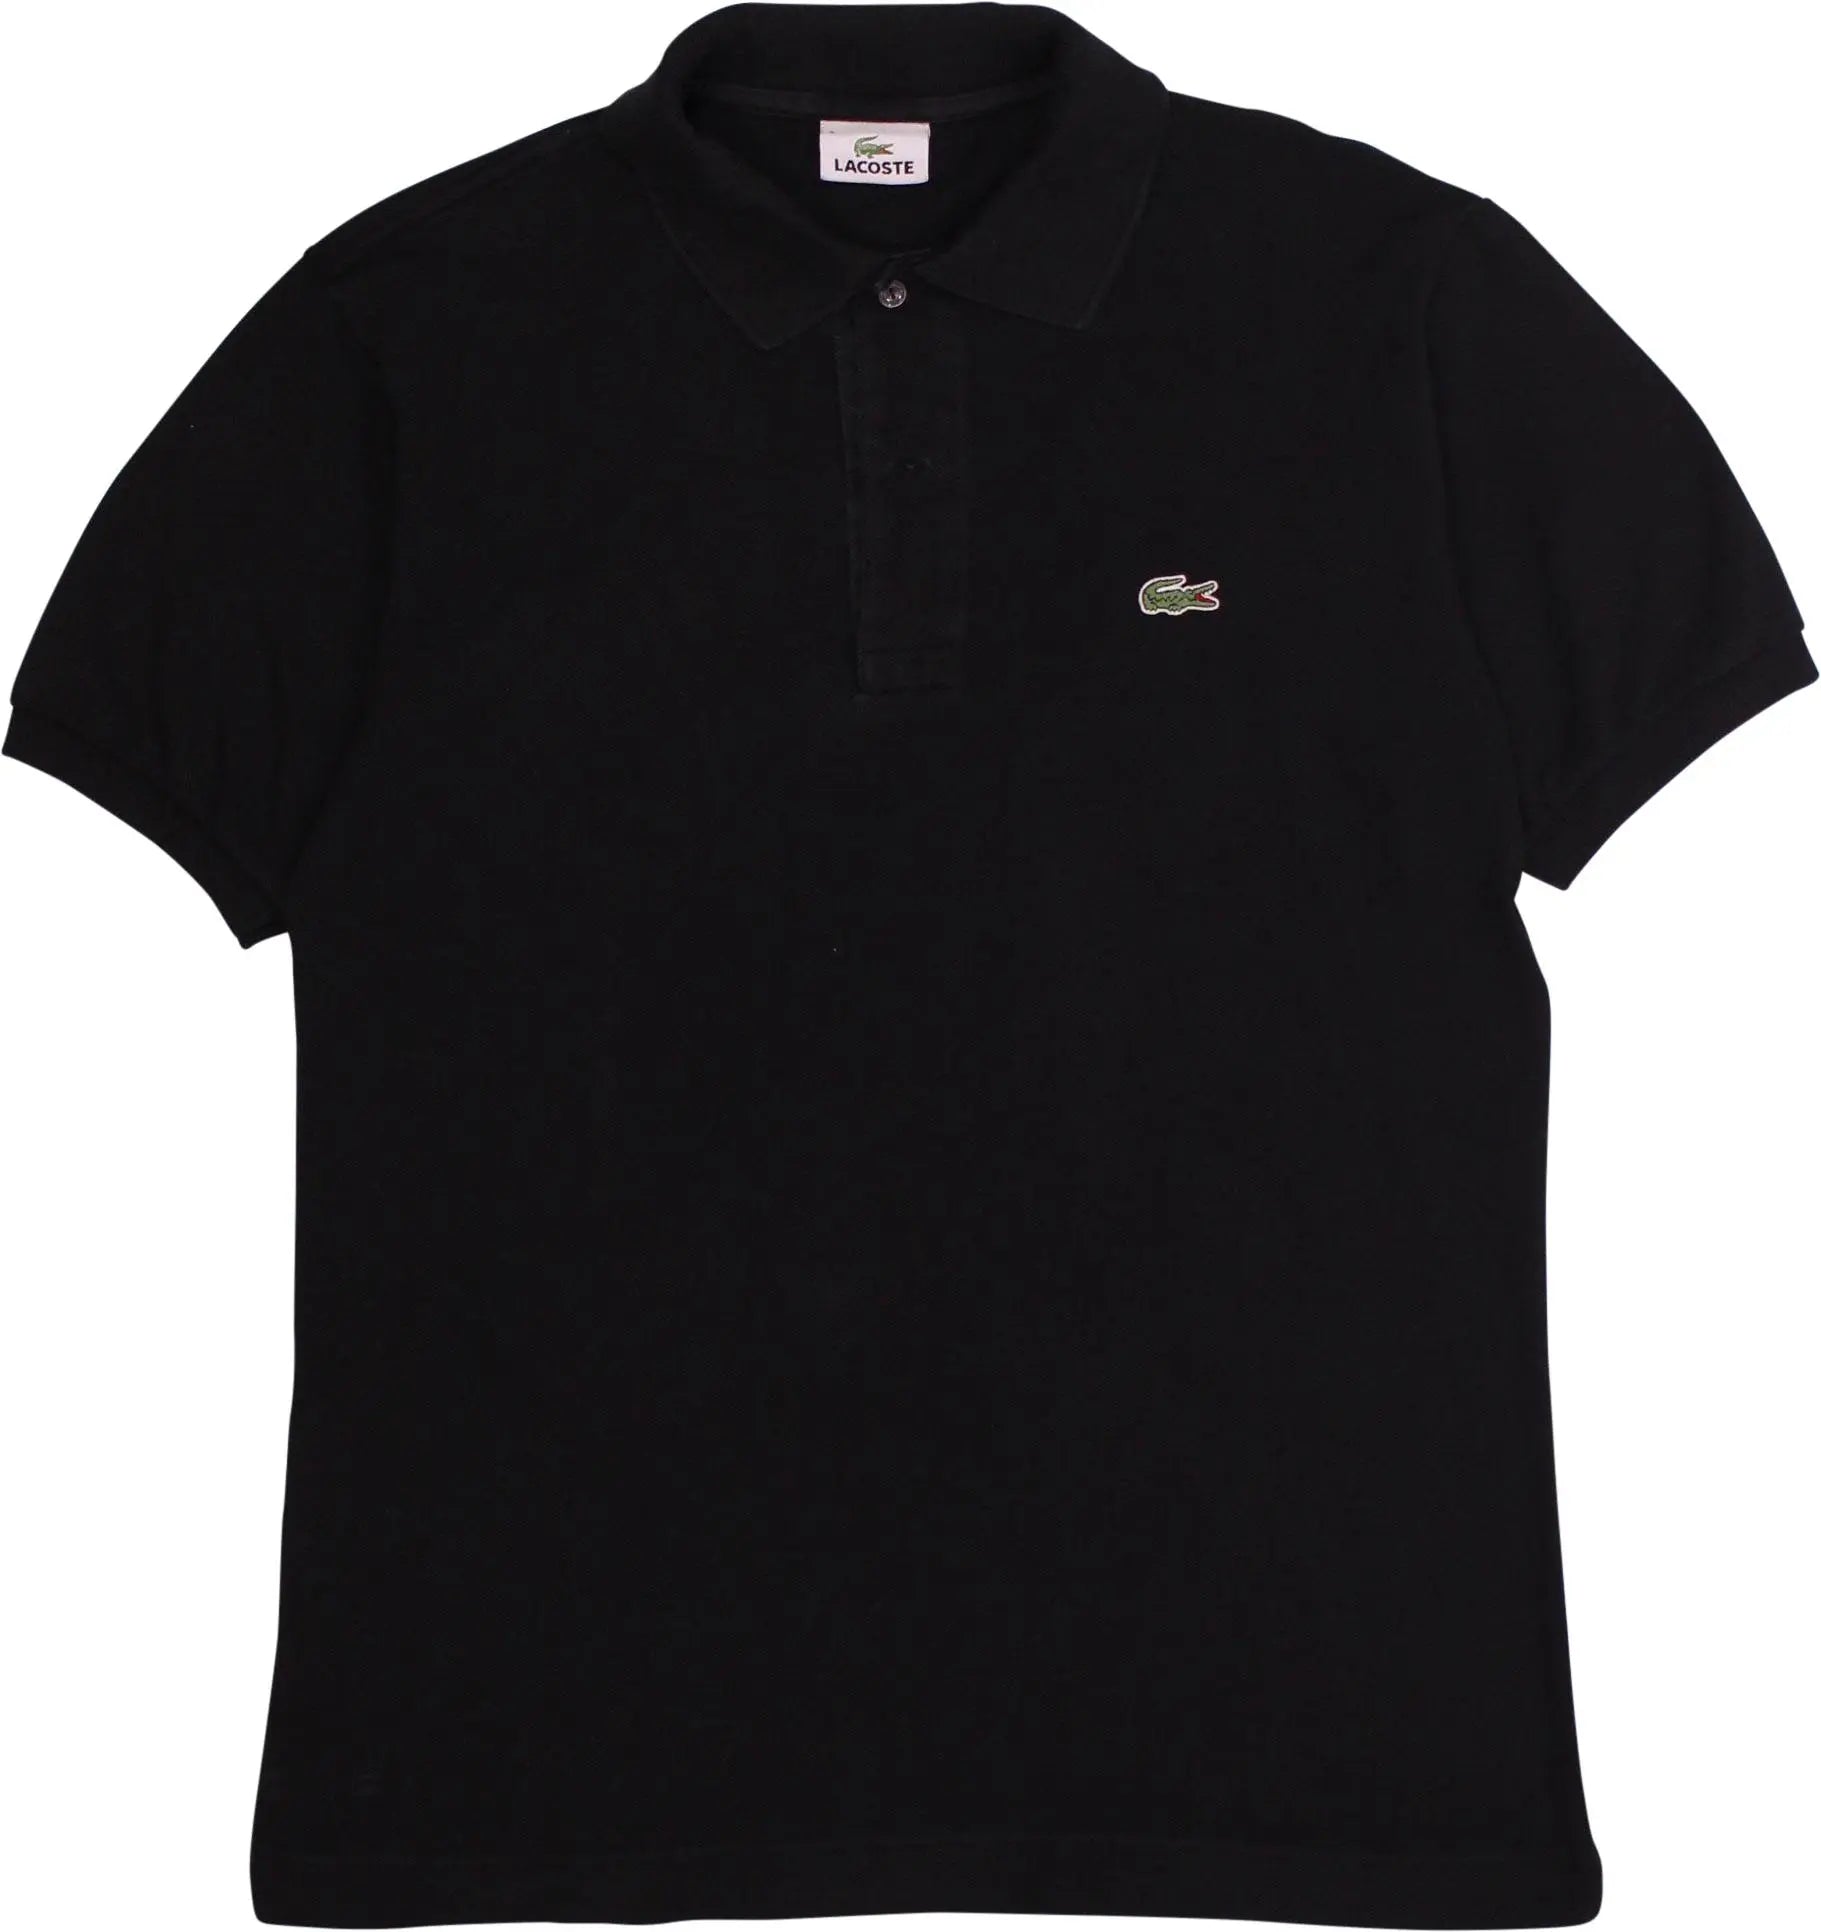 Lacoste - Black Polo Shirt by Lacoste- ThriftTale.com - Vintage and second handclothing